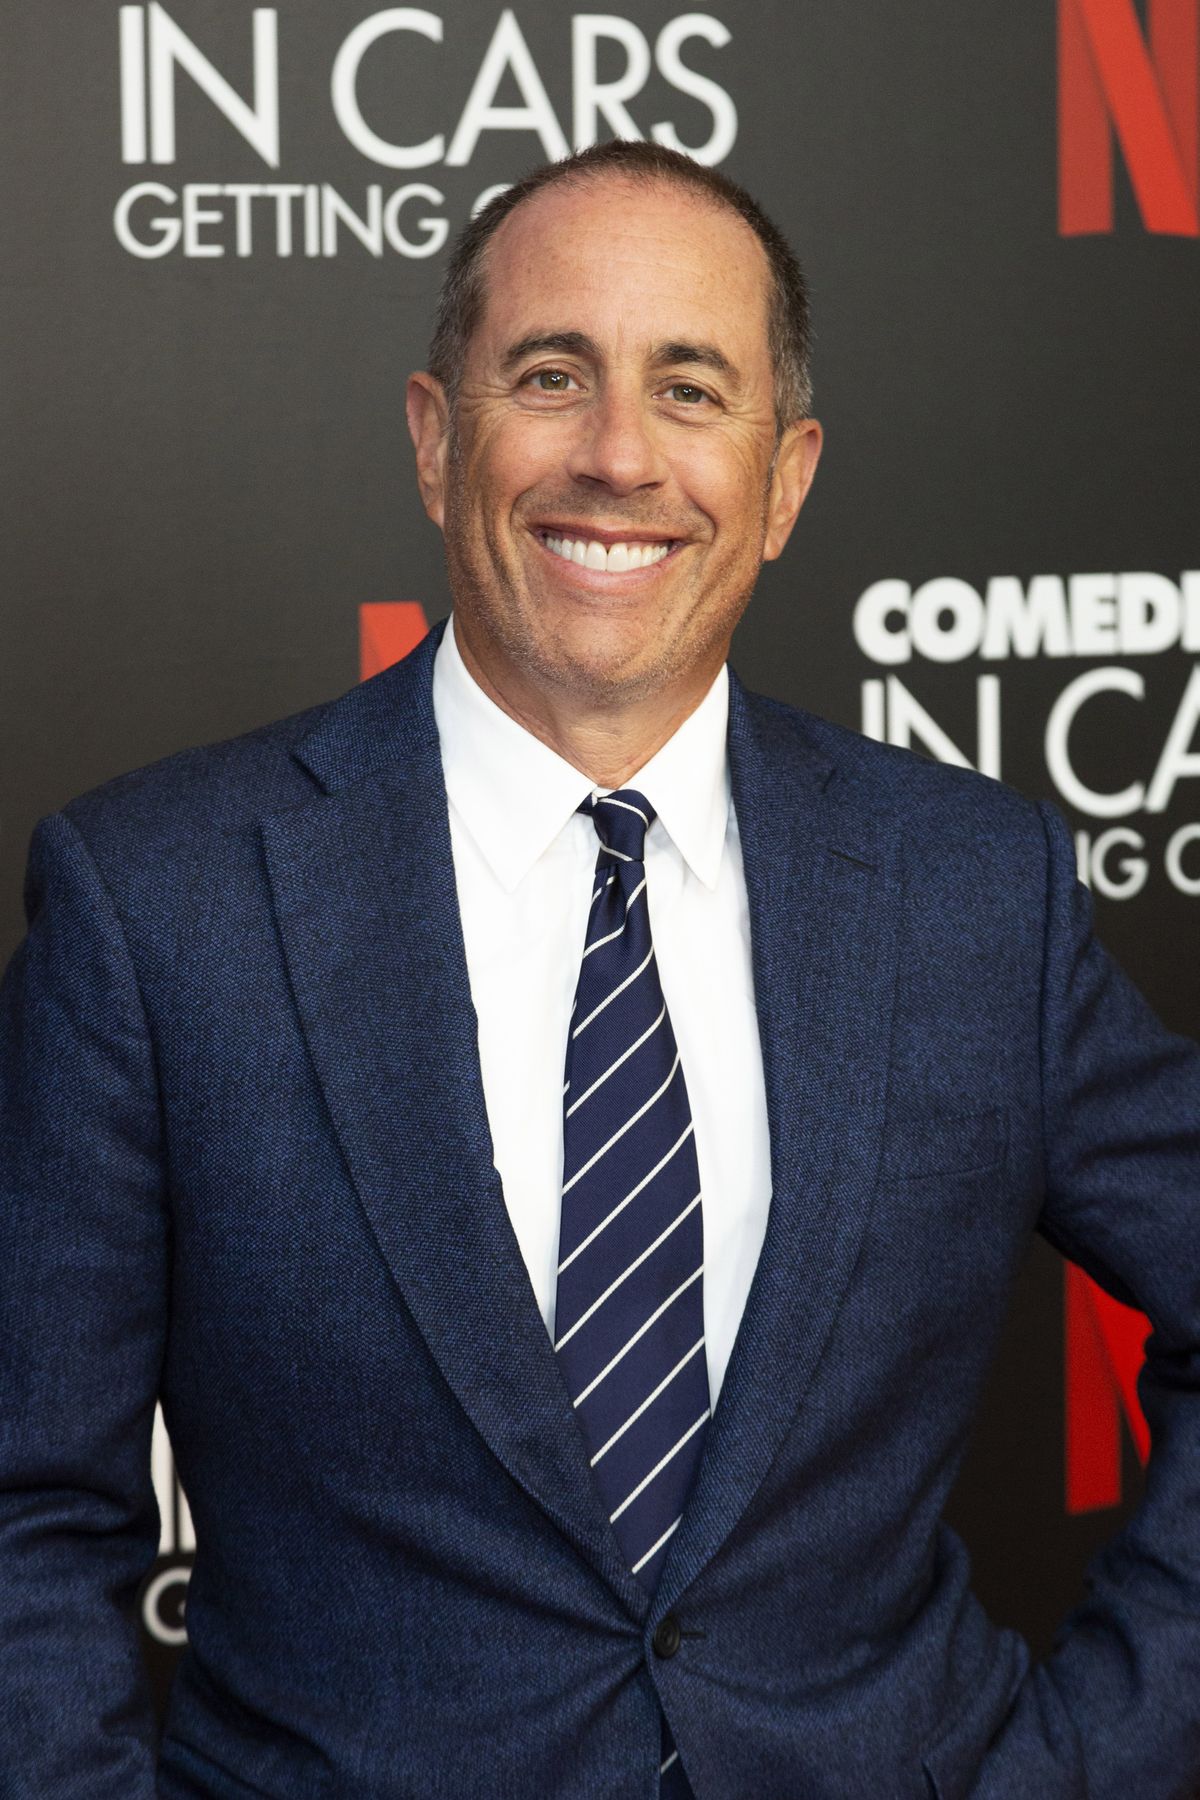 Jerry Seinfeld at the “Comedians in Cars Getting Coffee” photo call on July 17, 2019, in Beverly Hills, Calif.  (Willy Sanjuan/Associated Press)